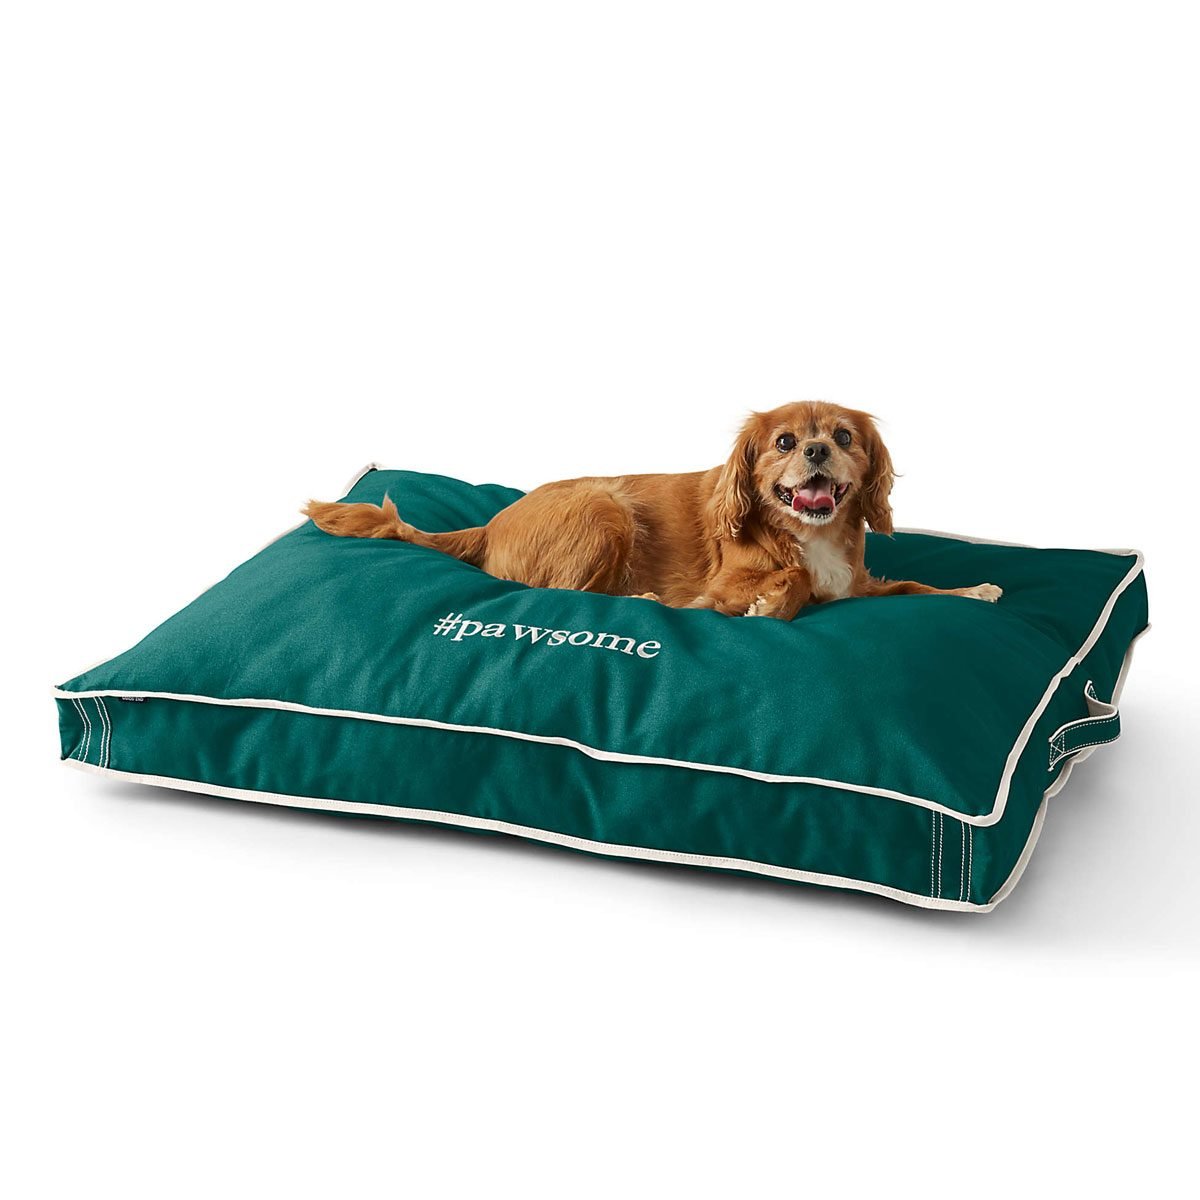 10 Best Dog Bed Covers and Accessories | The Family Handyman